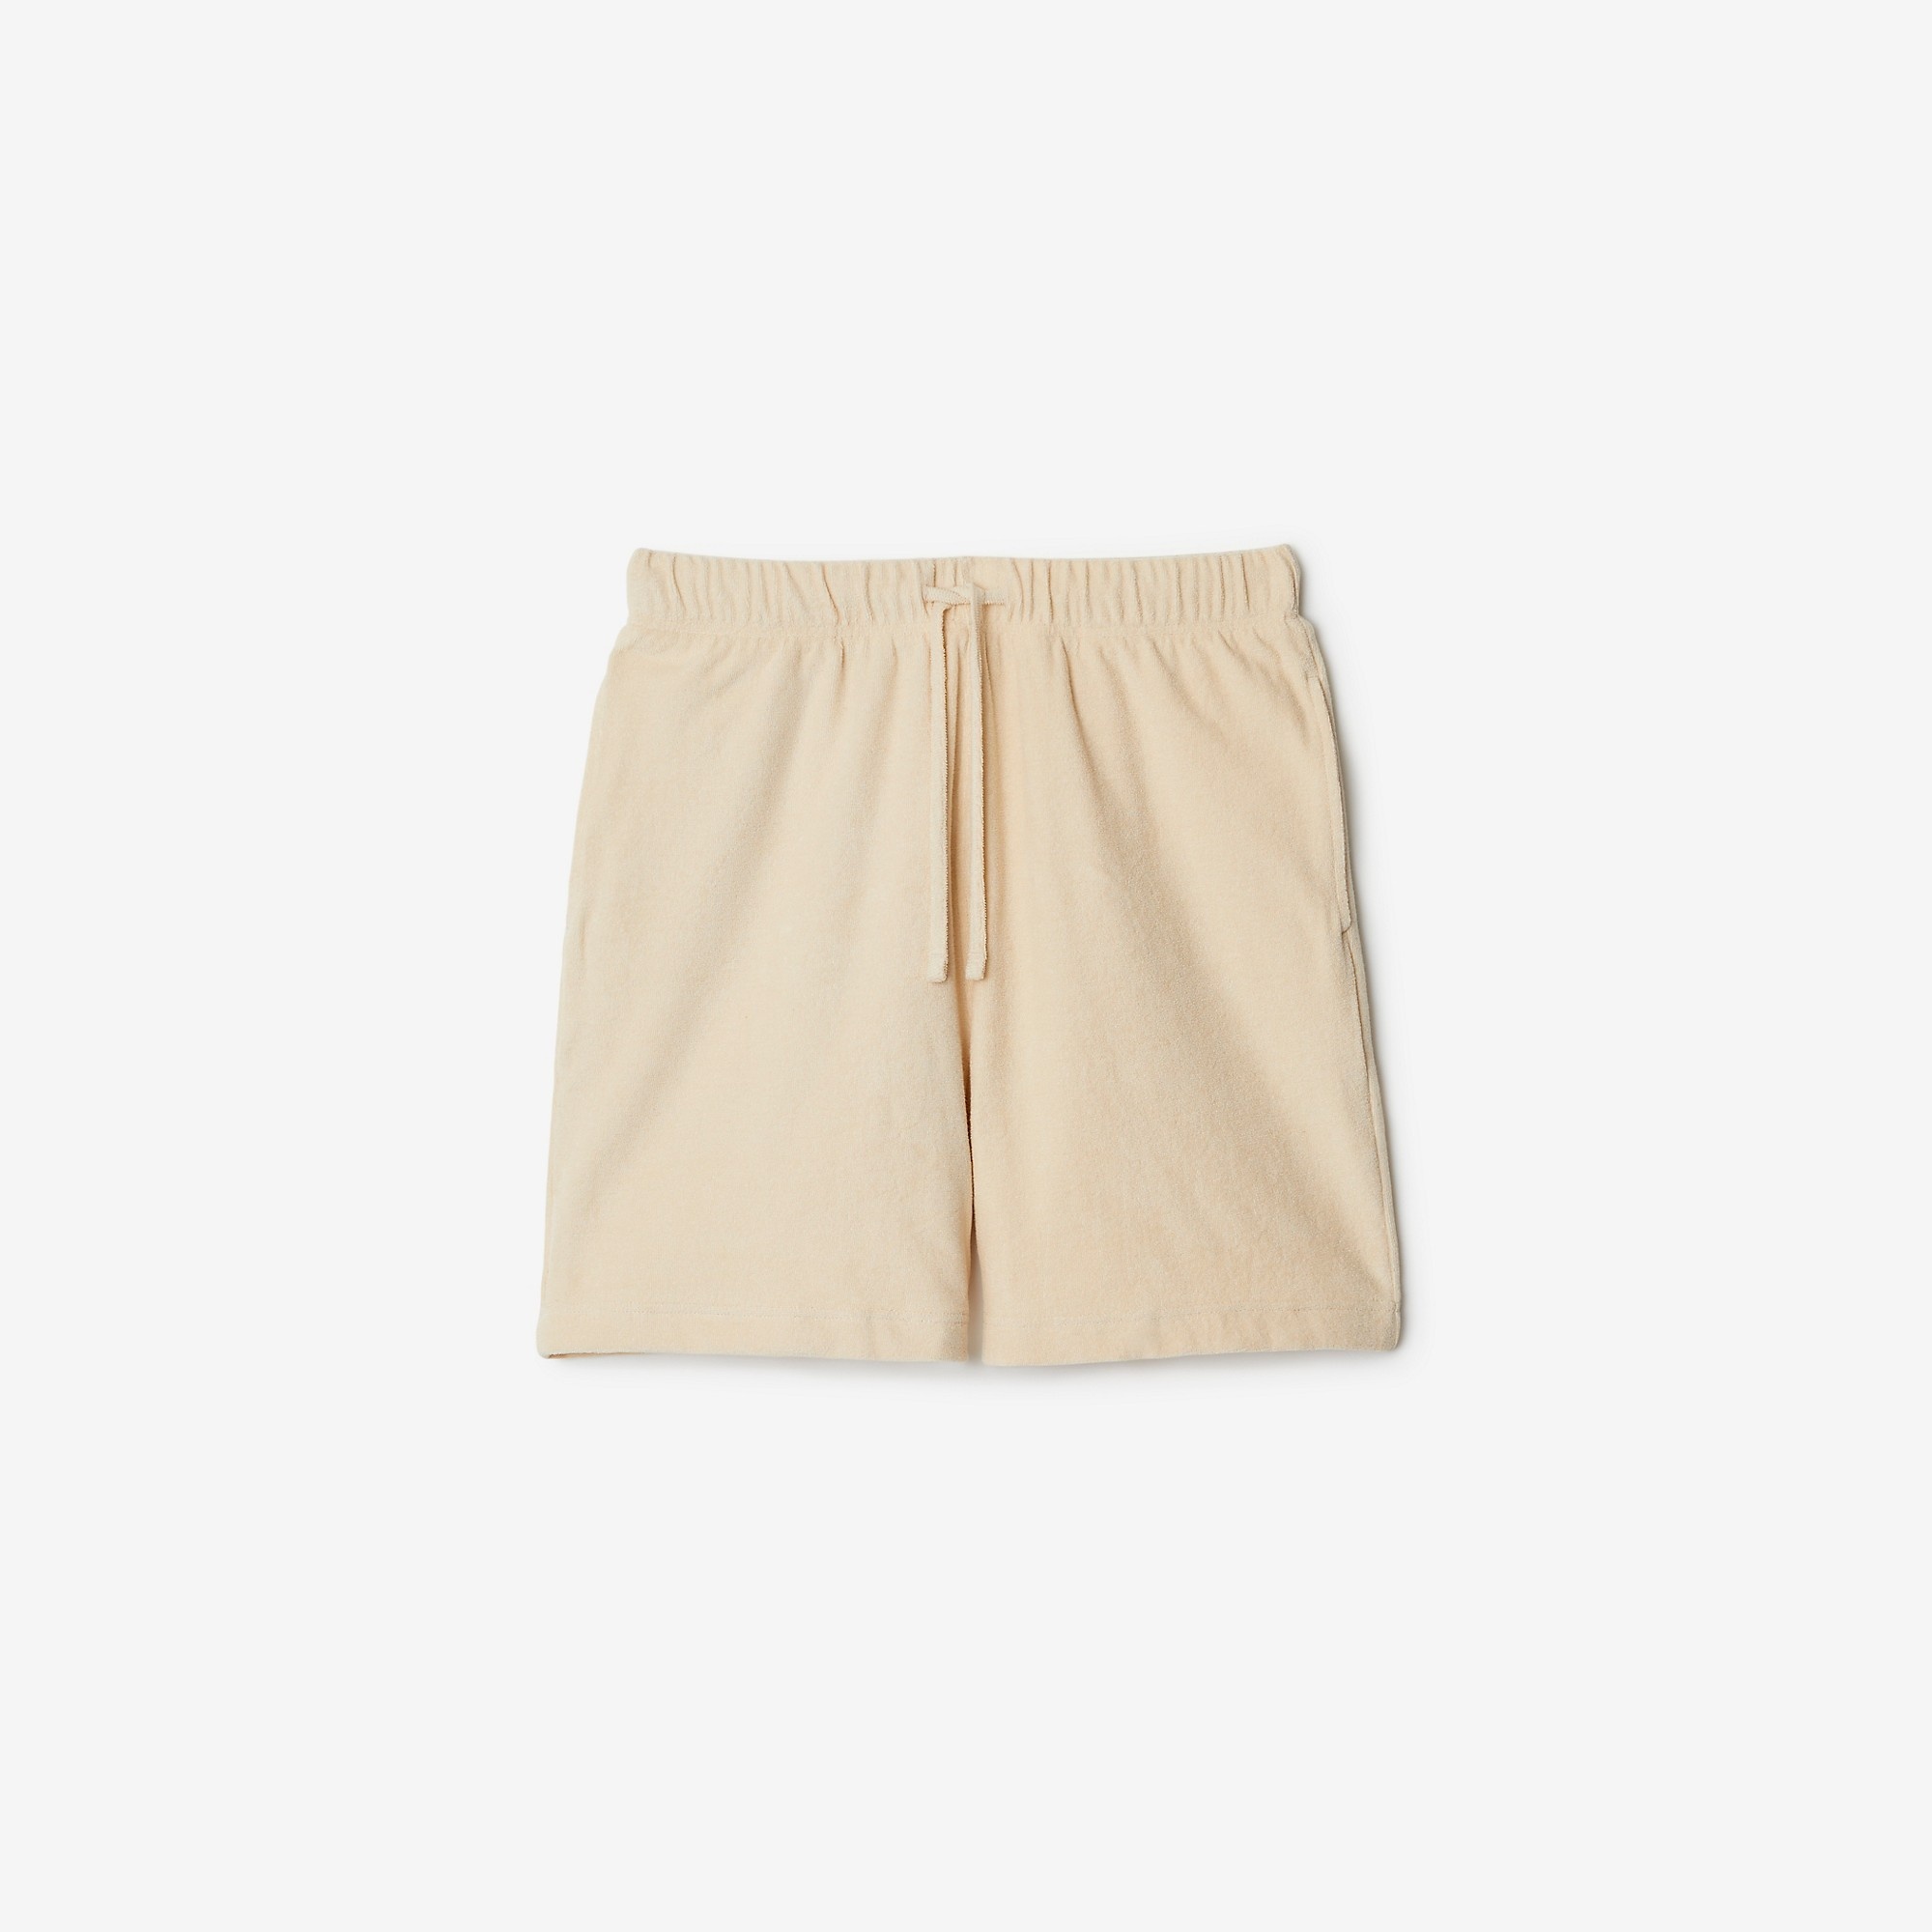 Cotton Towelling Shorts - 1